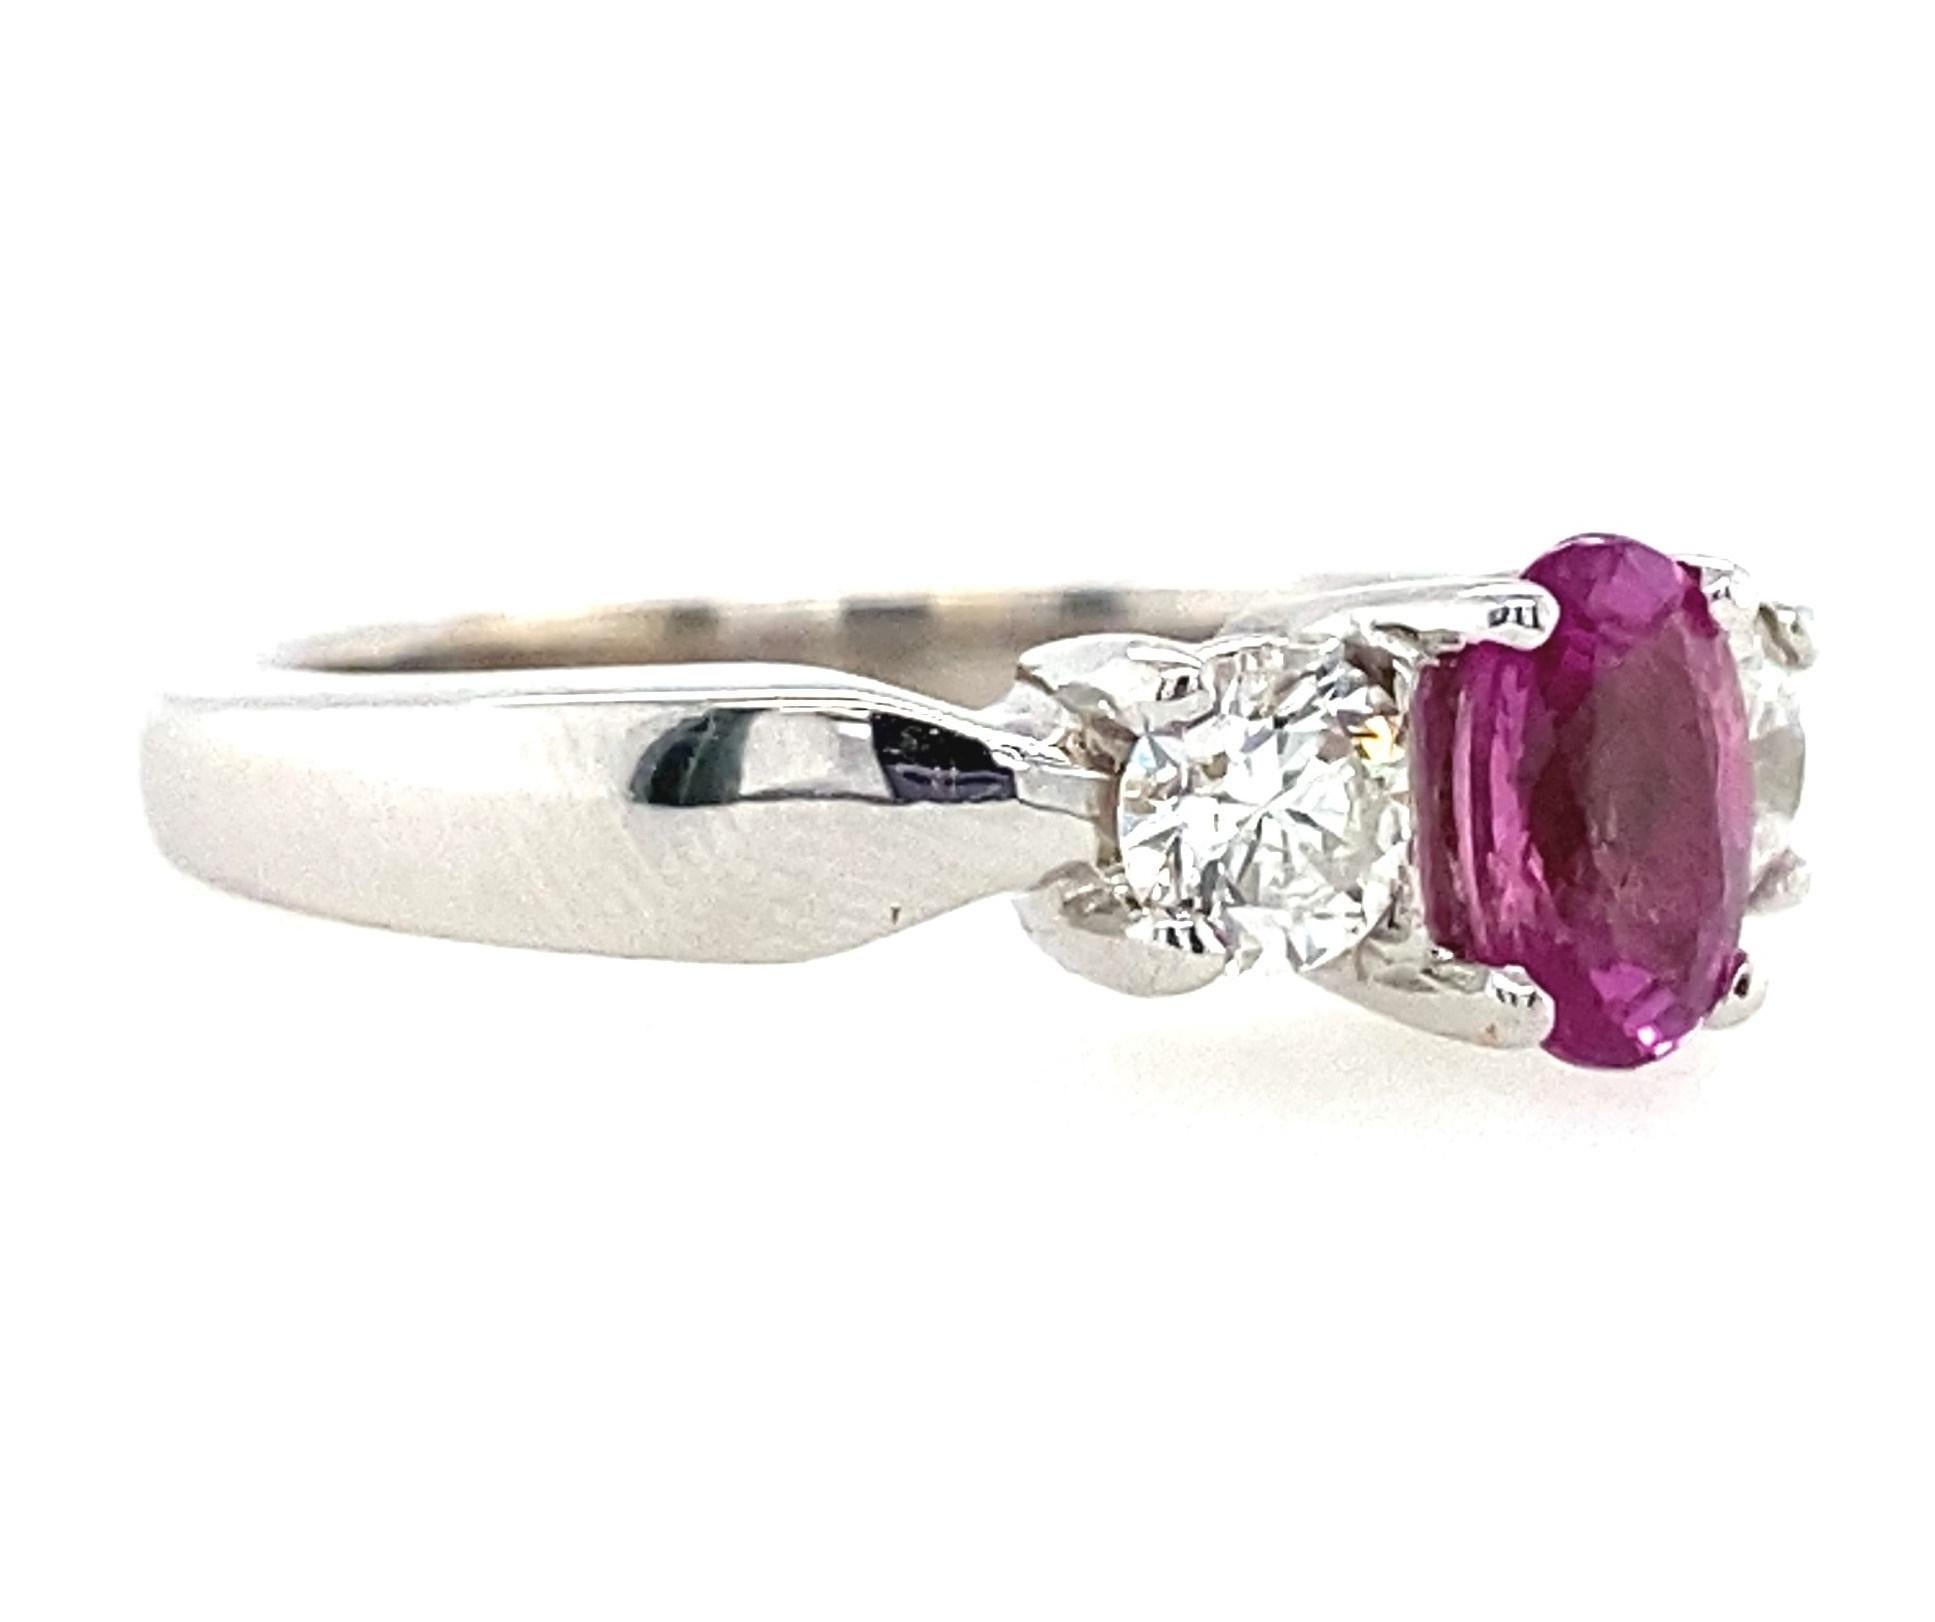 This ring features a .86ct deeply saturated natural pink sapphire nestled into .55TCW of the most sparkly diamonds you could ask for. Low lighting, direct sun lighting, it doesn't matter--these diamonds are here to party! They are G-H in color and